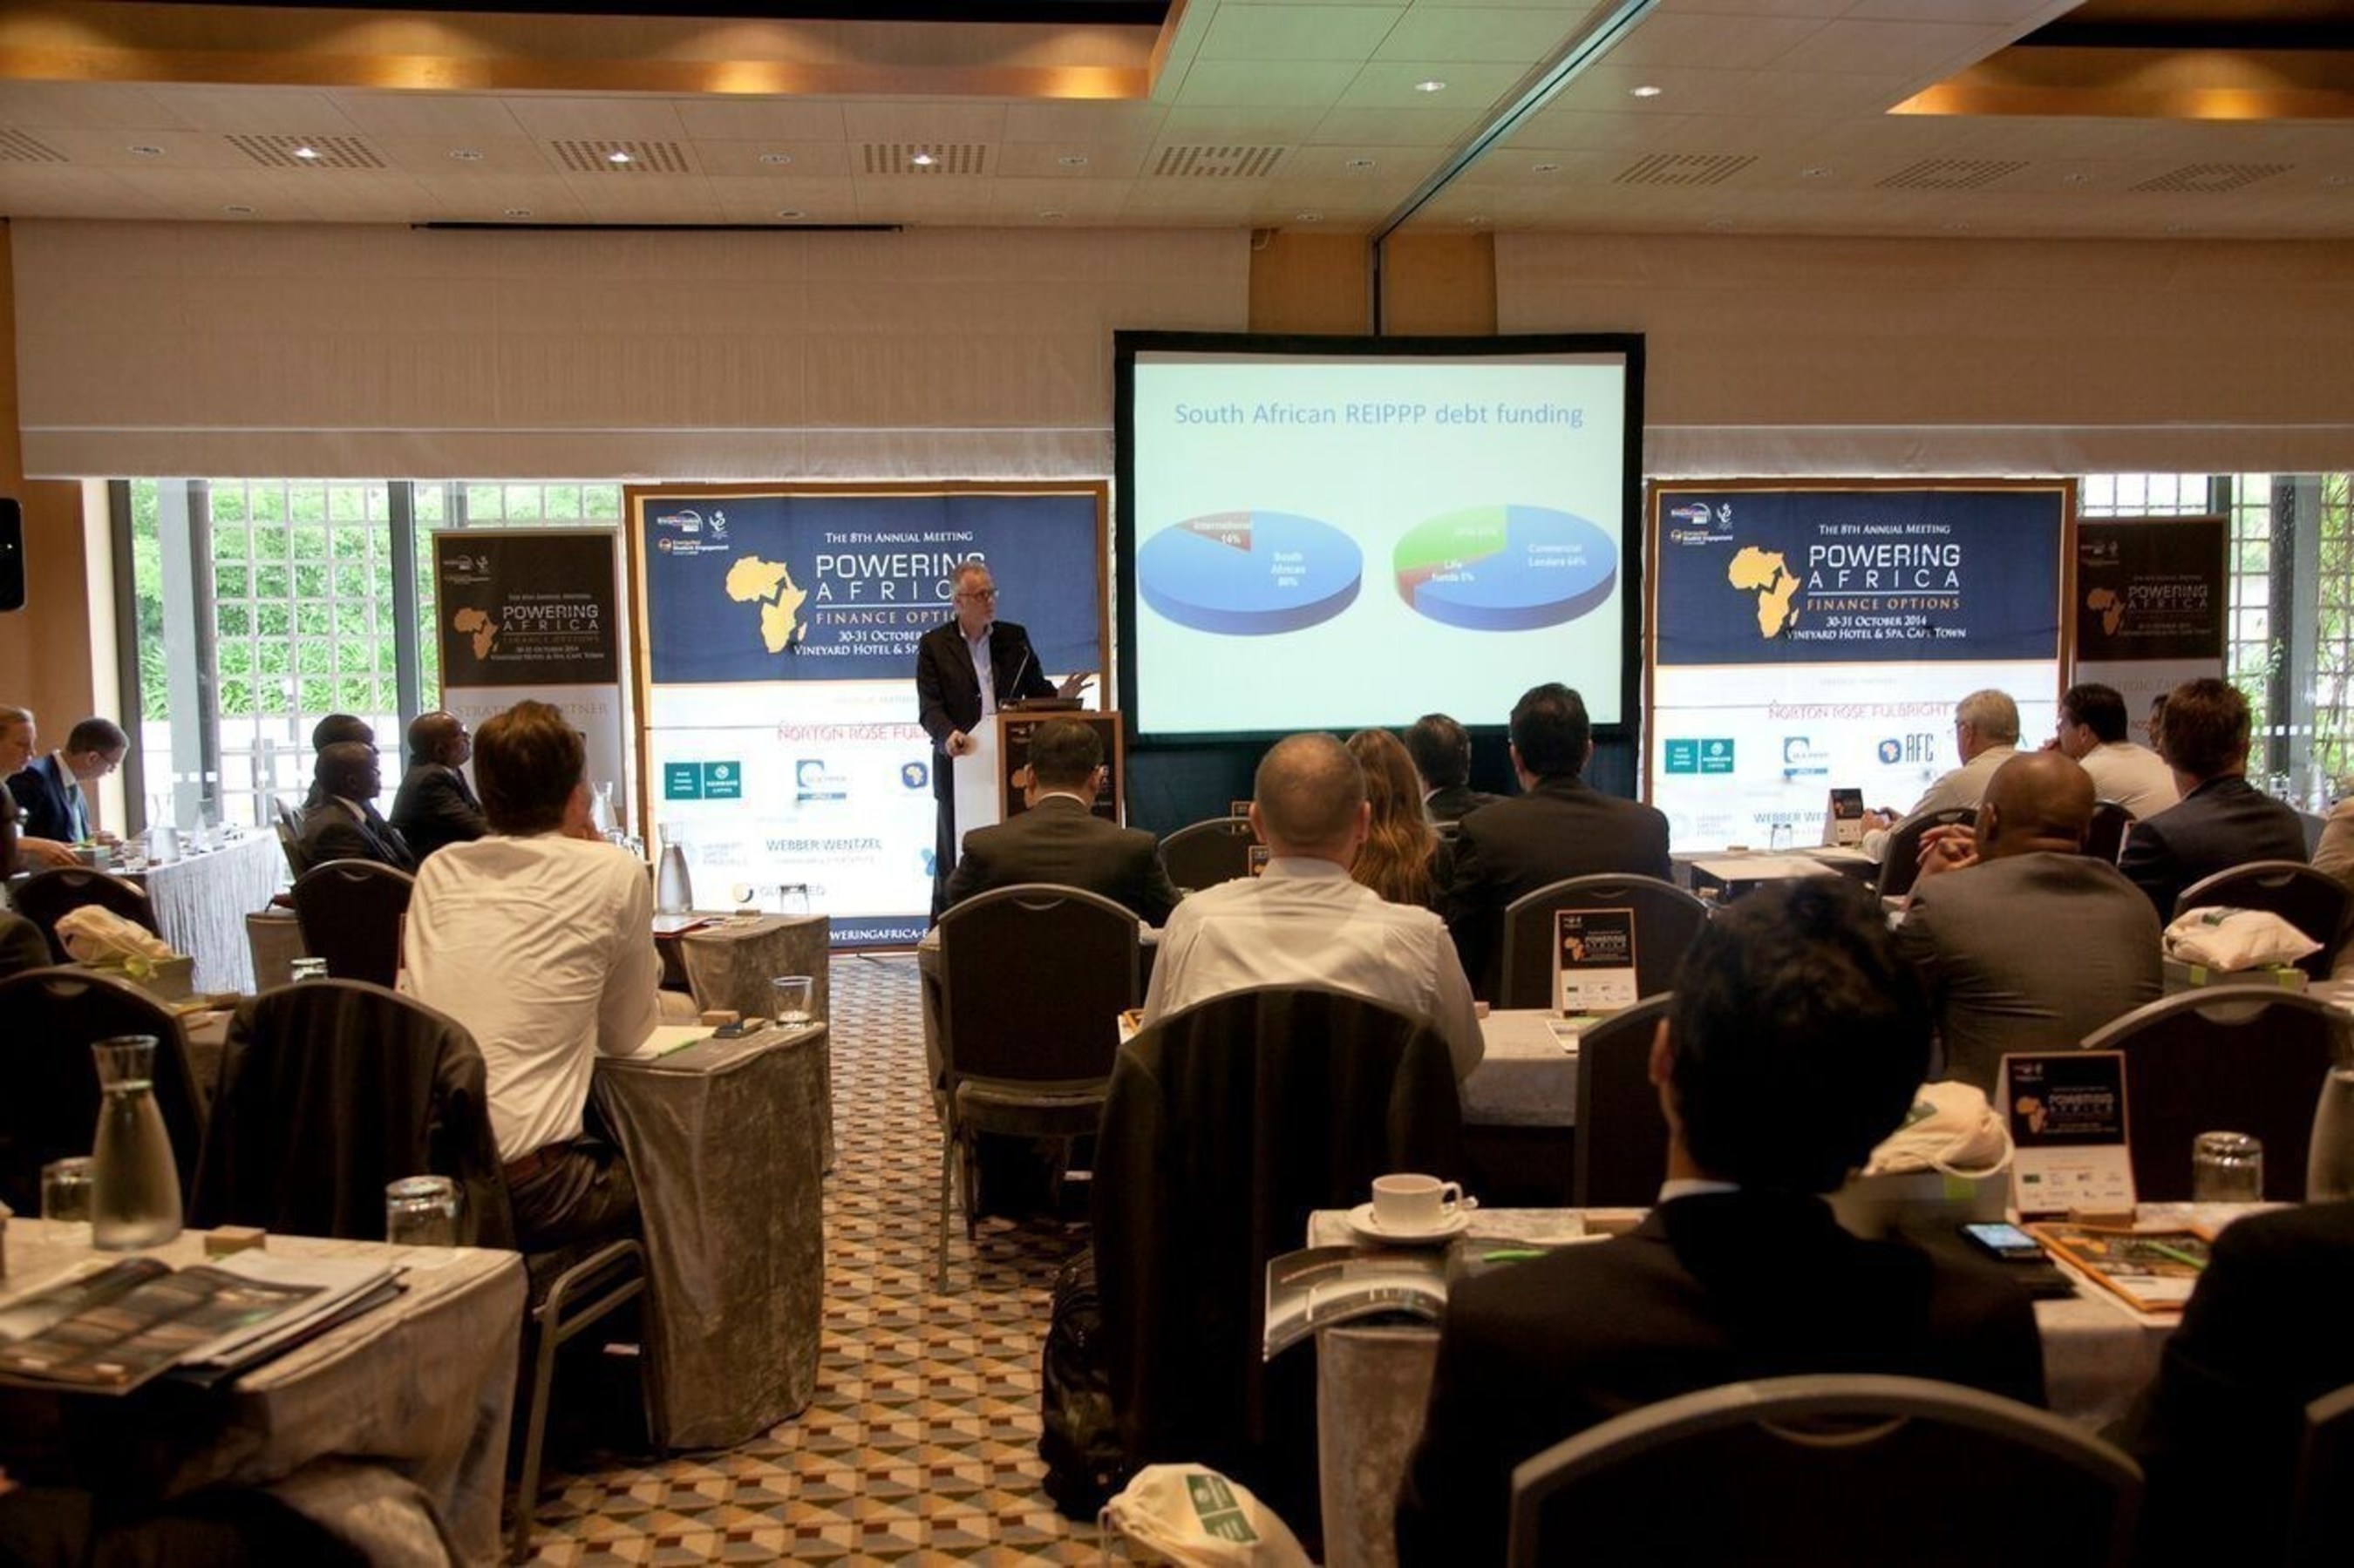 Delegates attend a session at one of Energynet's Powering Africa meetings (PRNewsFoto/EnergyNet)